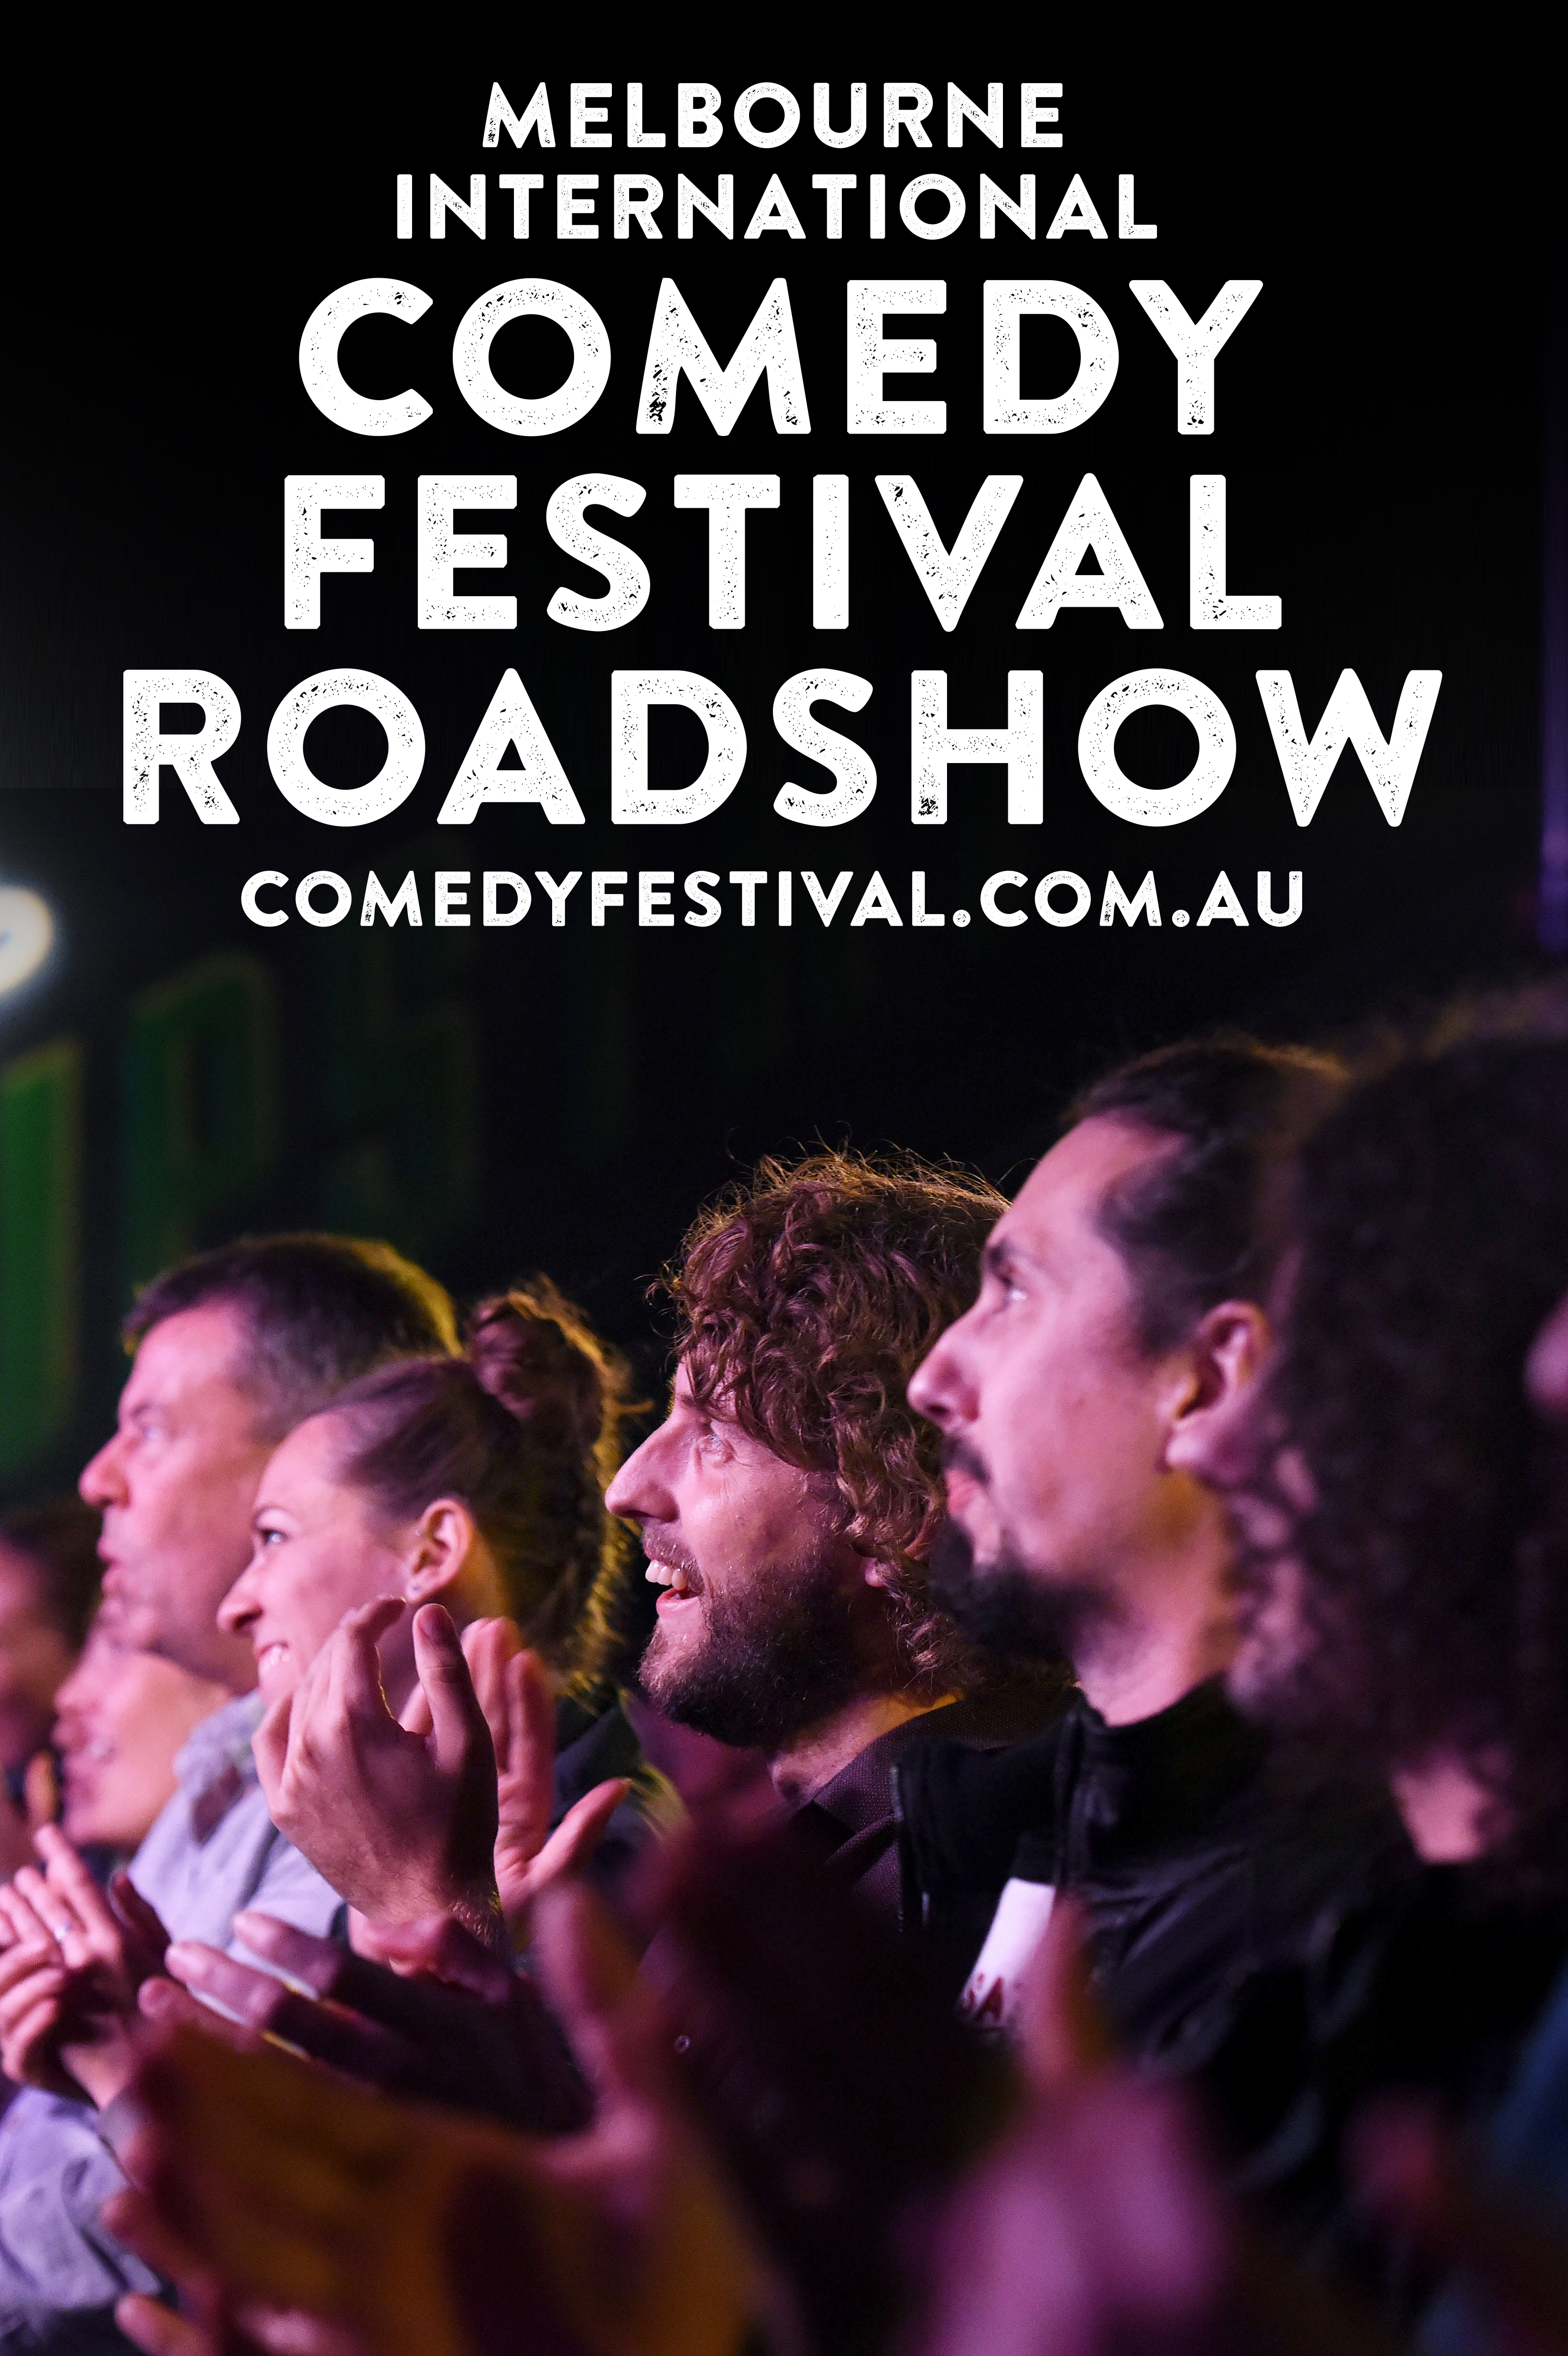 The Melbourne International Comedy Festival Roadshow is back at CCC in June 2019